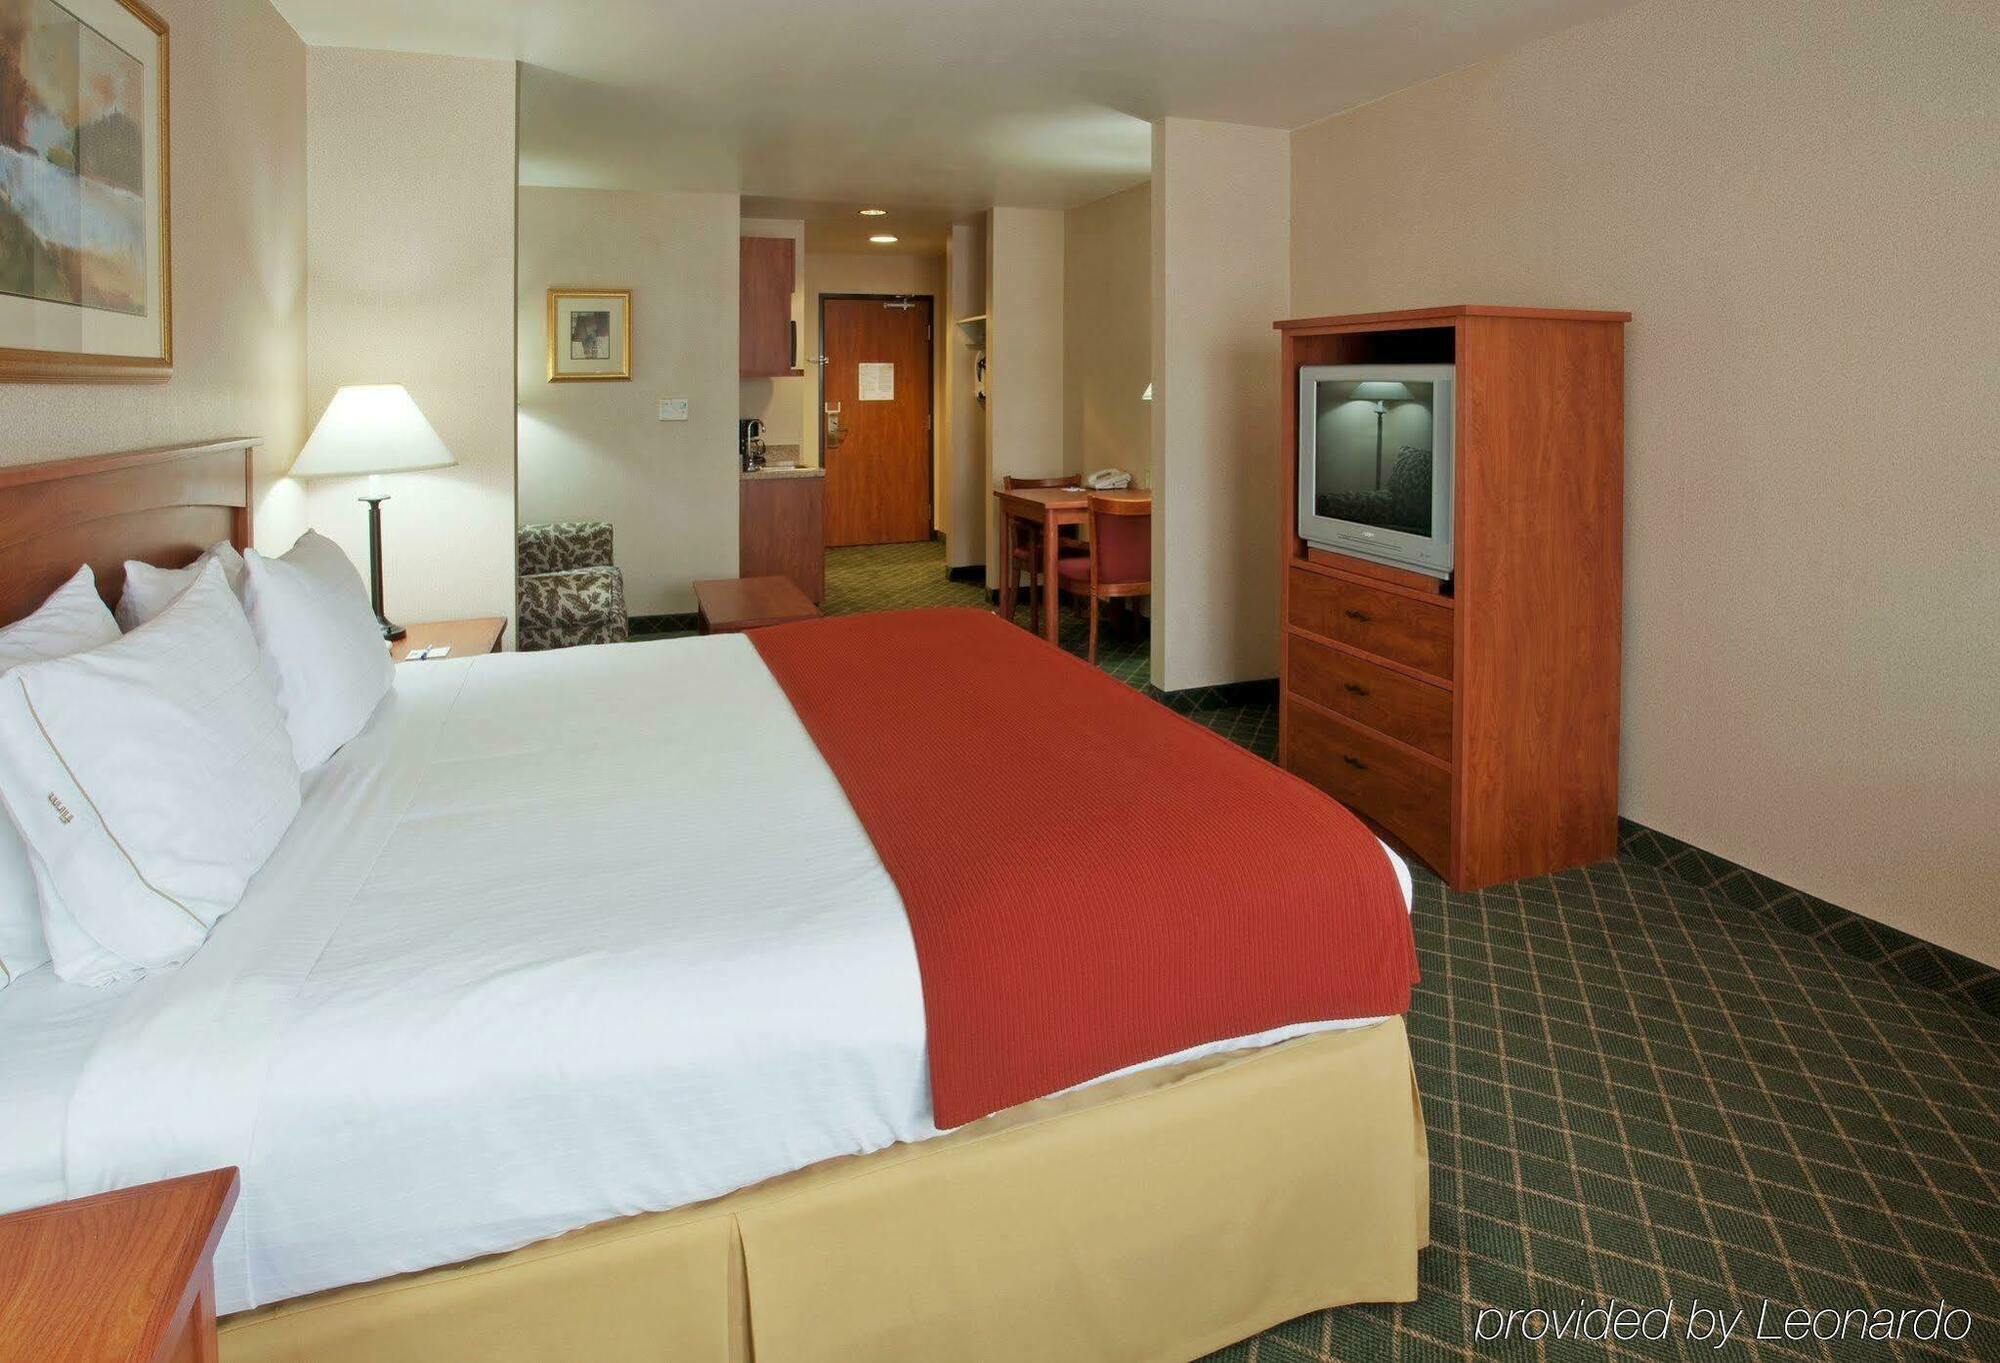 Gold Miners Inn Grass Valley, Ascend Hotel Collection Extérieur photo